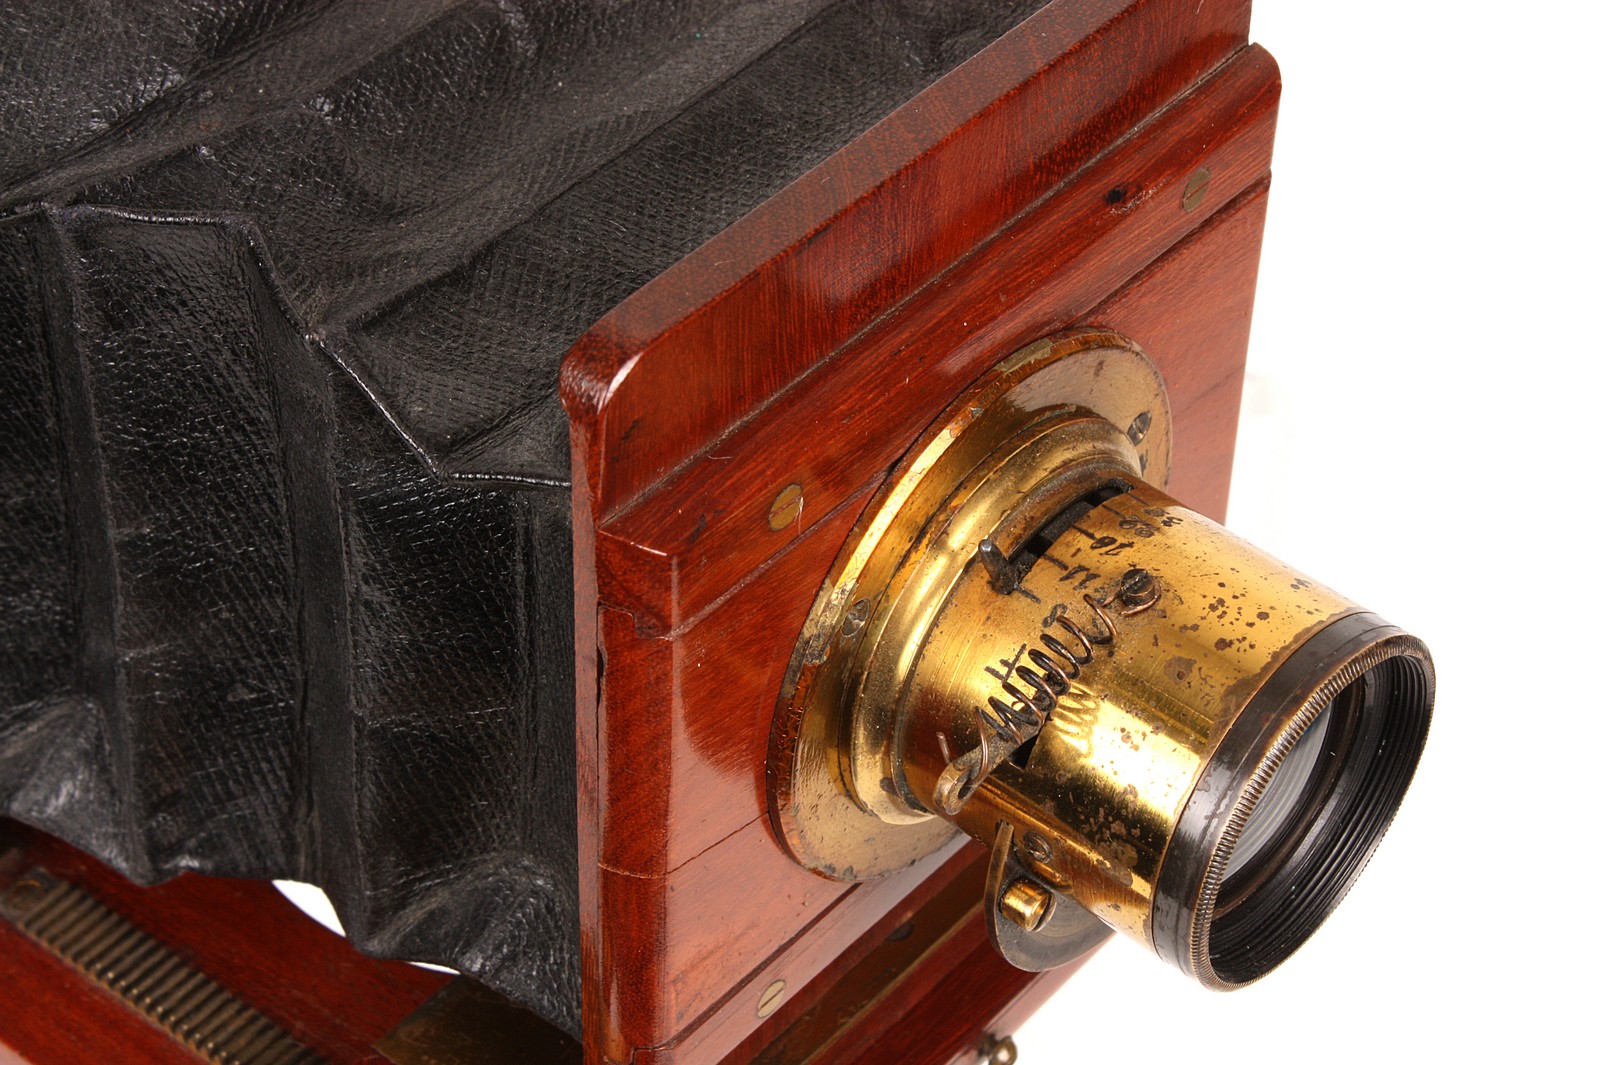 A W. A. C. Smith Mahogany Quarter-Plate Camera, 3x4”, serial no. 56, with unmarked f/8 brass lens, - Image 2 of 3